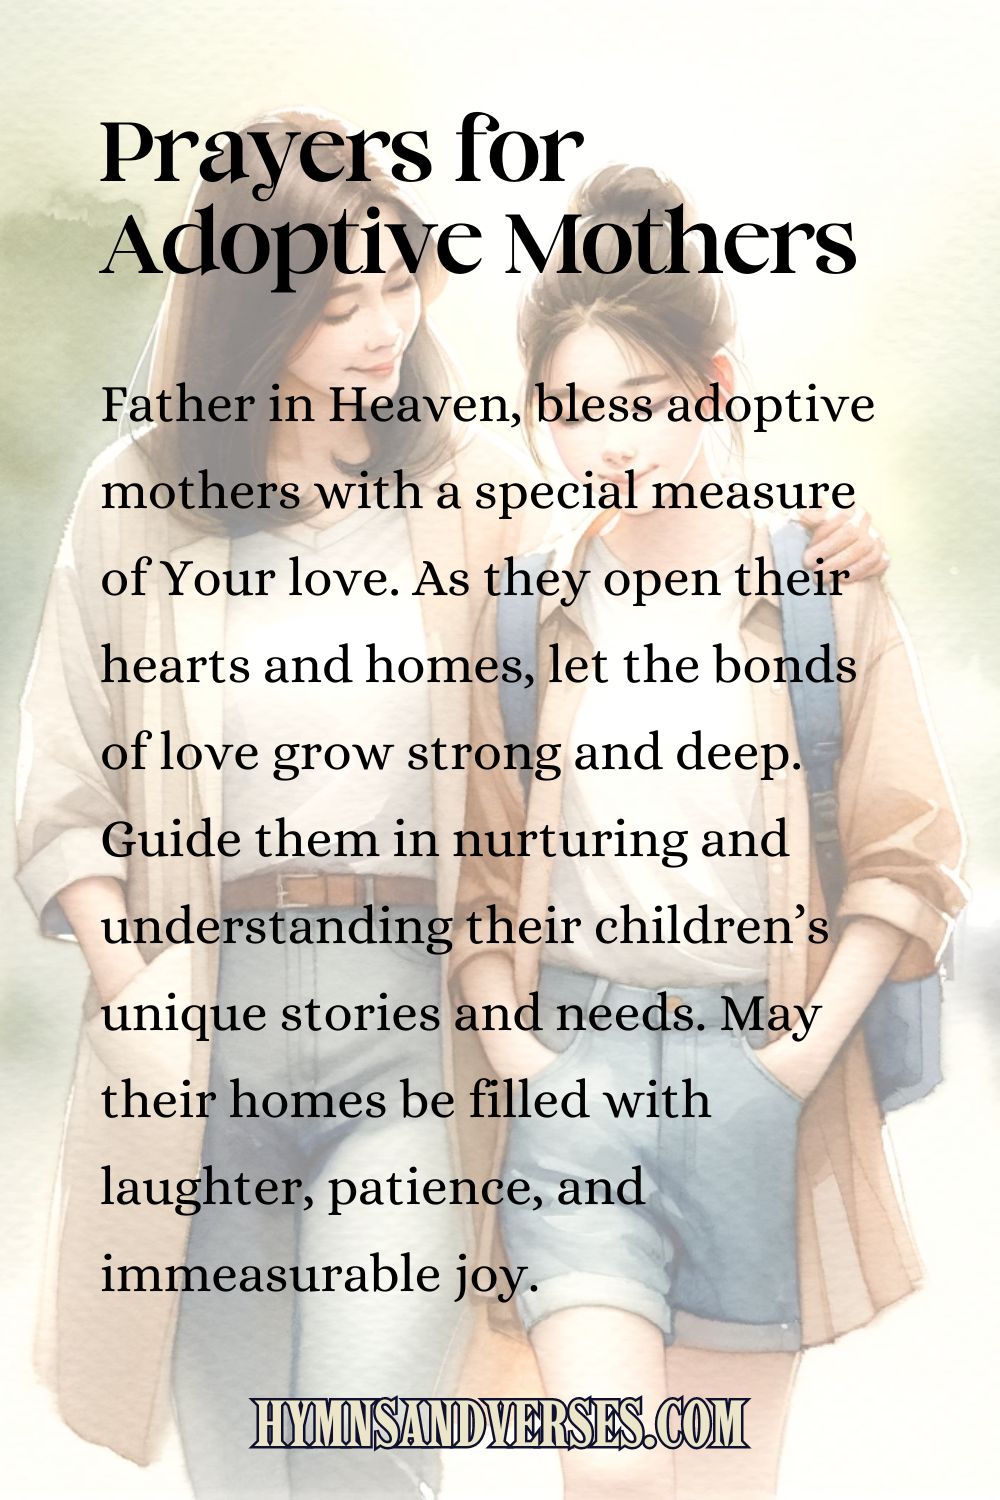 Pin image for Prayers for Adoptive Mothers, reads: Father in Heaven, bless adoptive mothers with a special measure of Your love. As they open their hearts and homes, let the bonds of love grow strong and deep. Guide them in nurturing and understanding their children’s unique stories and needs. May their homes be filled with laughter, patience, and immeasurable joy.